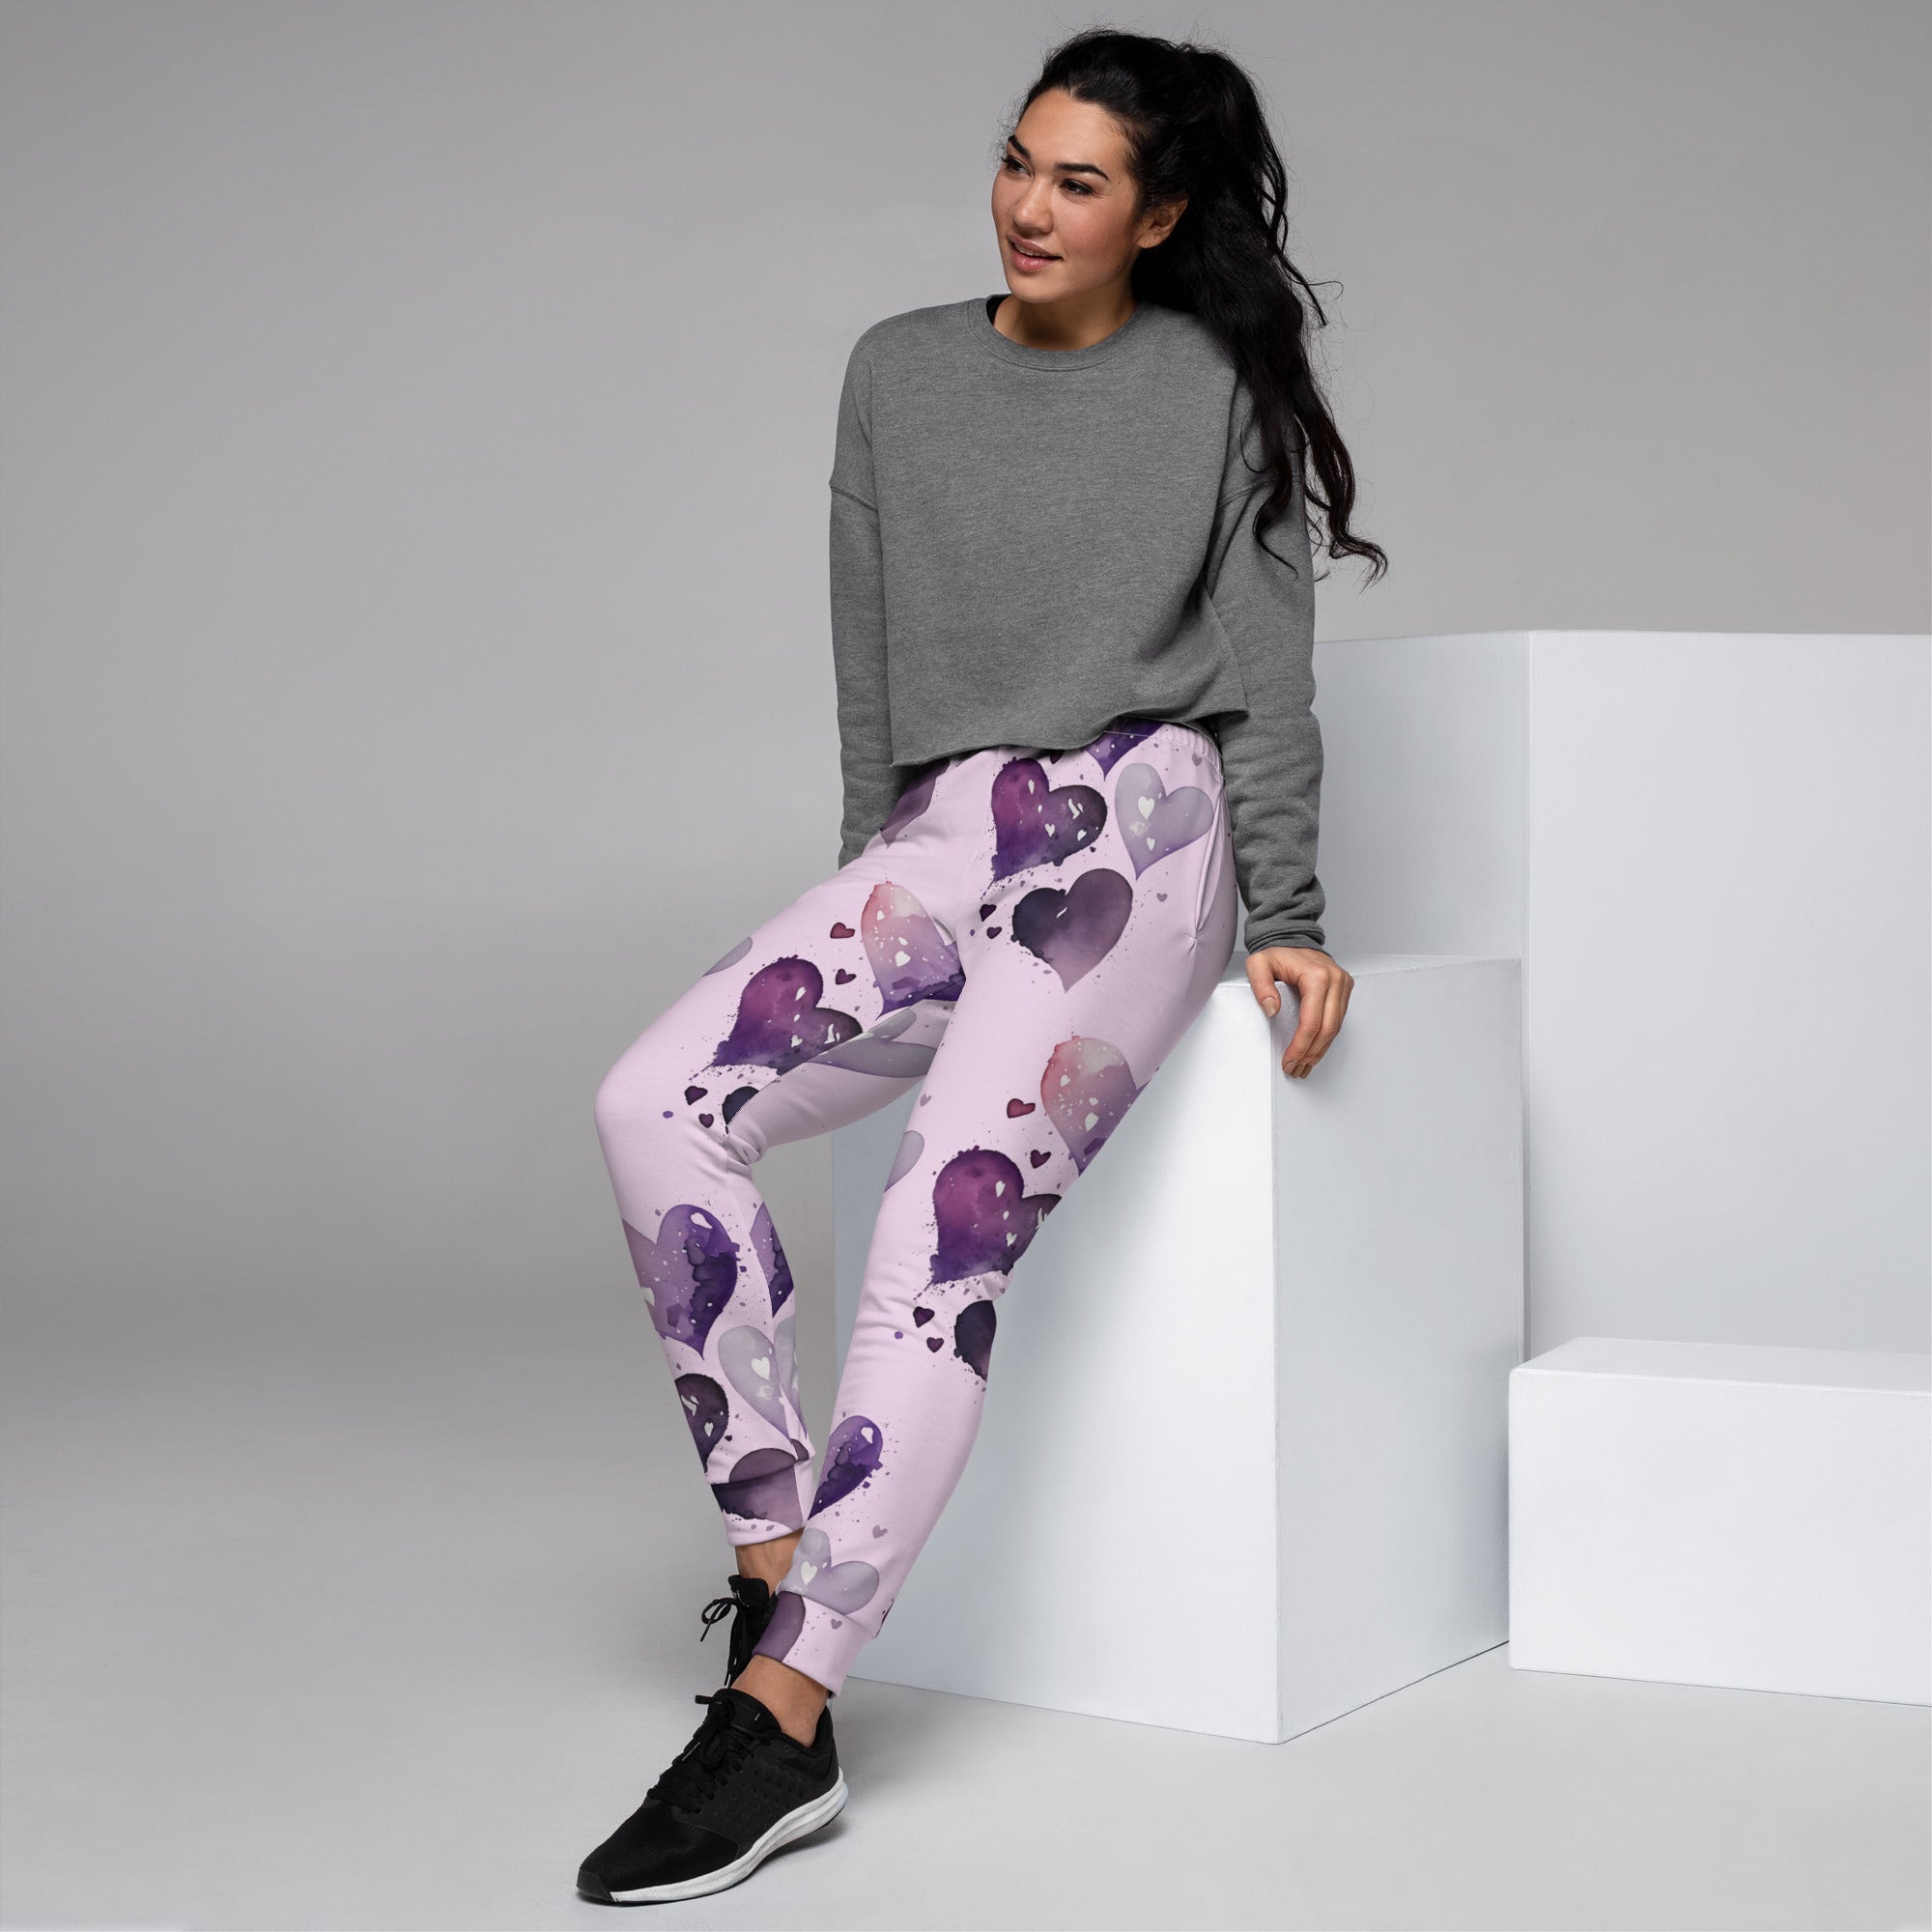 Candy Hearts Women's Joggers